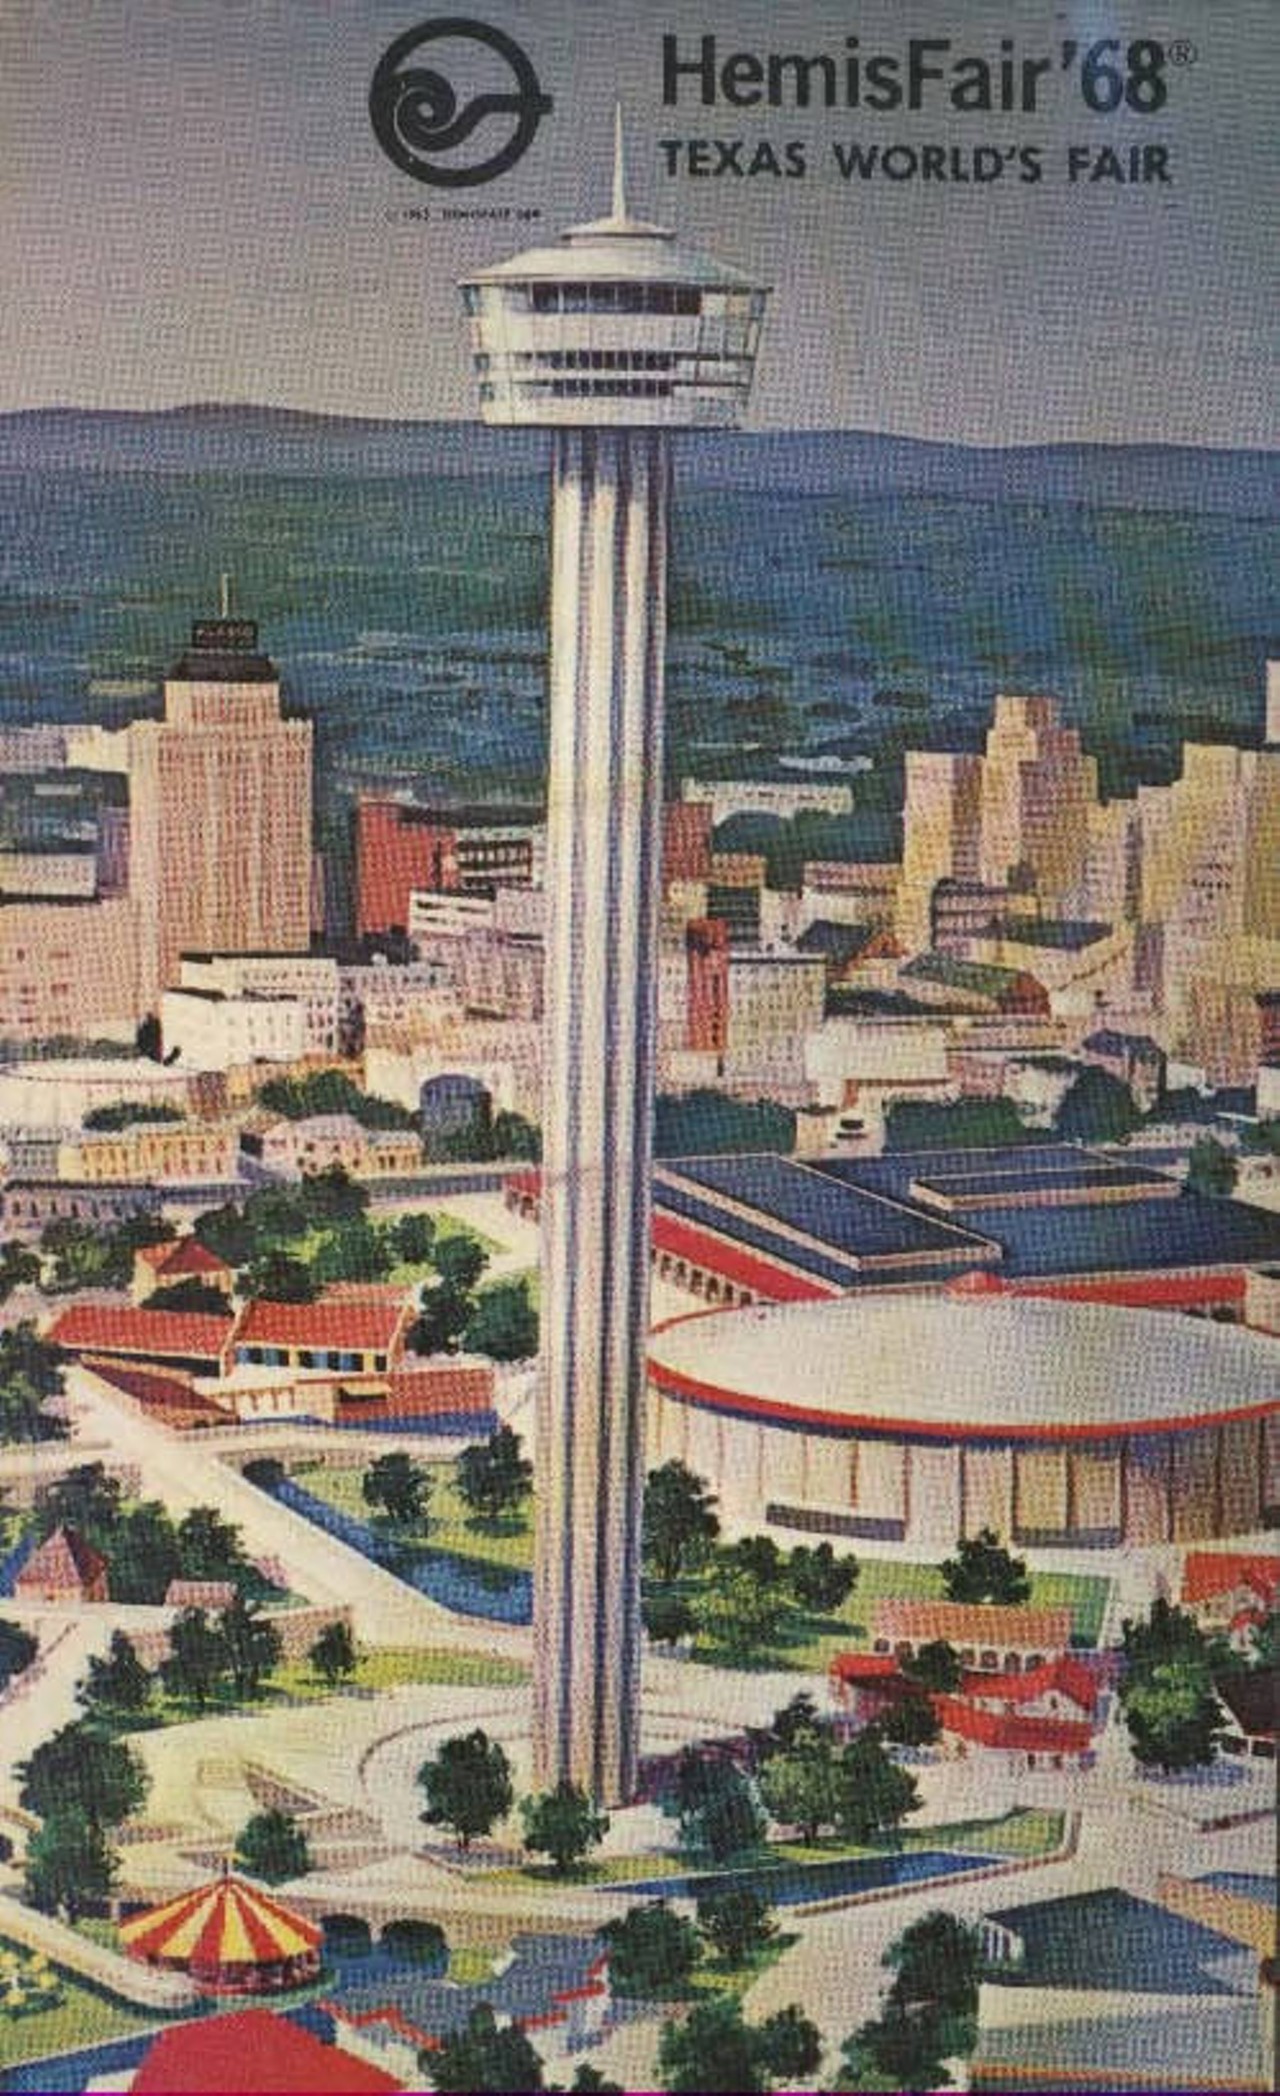 Tower of the Americas, HemisFair '68
Rendering shows the 622 foot structure and downtown San Antonio.